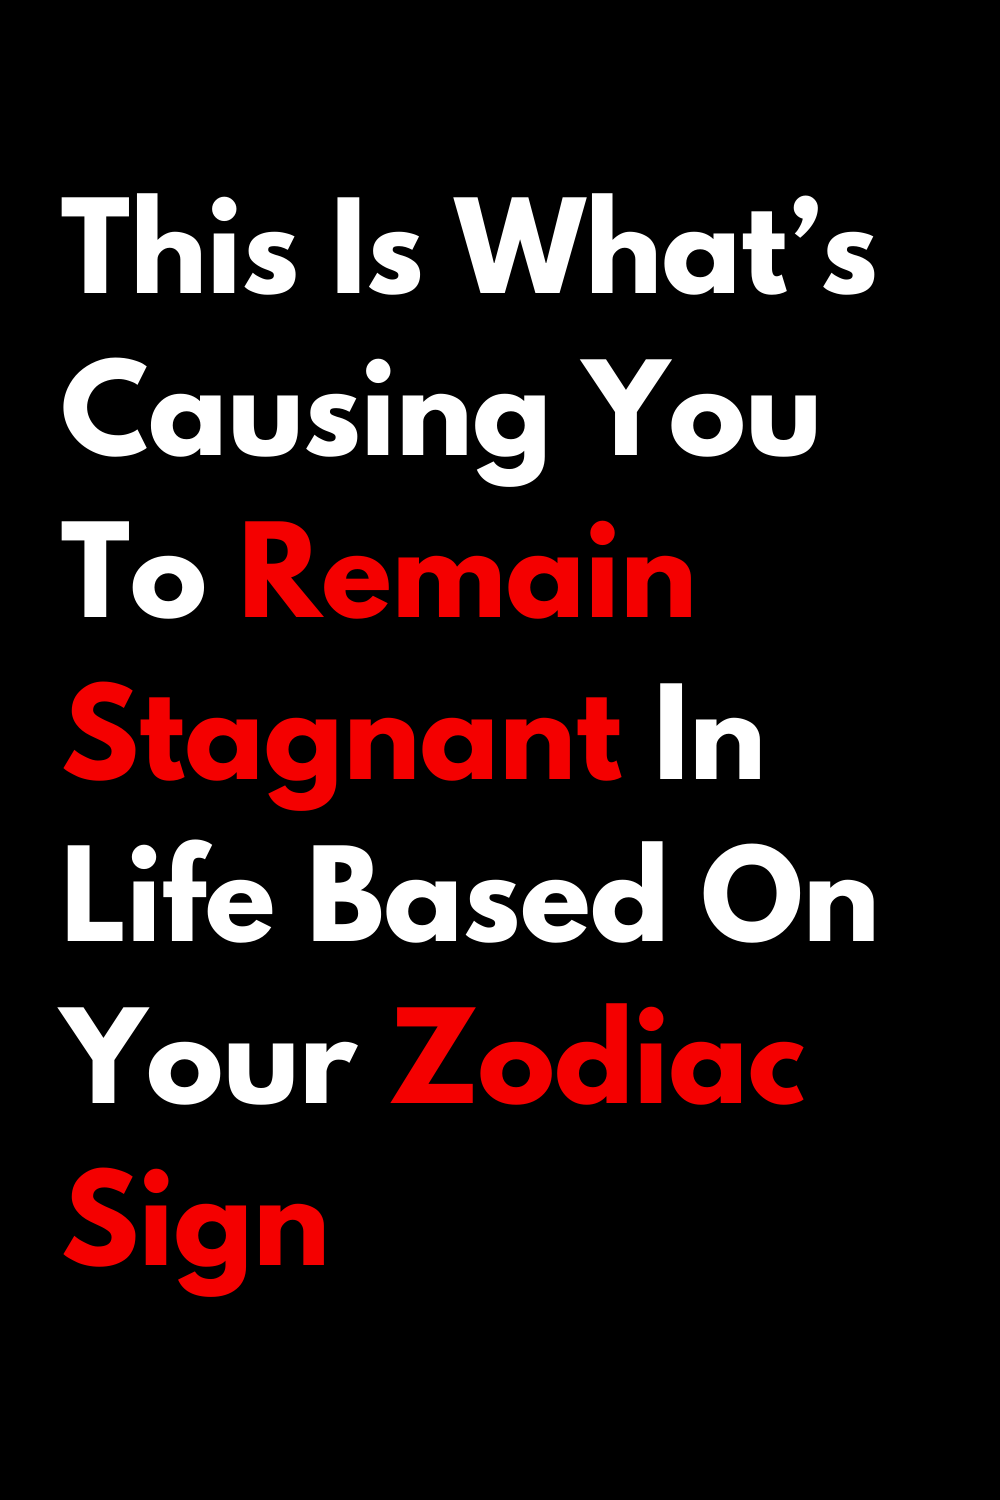 This Is What’s Causing You To Remain Stagnant In Life Based On Your Zodiac Sign